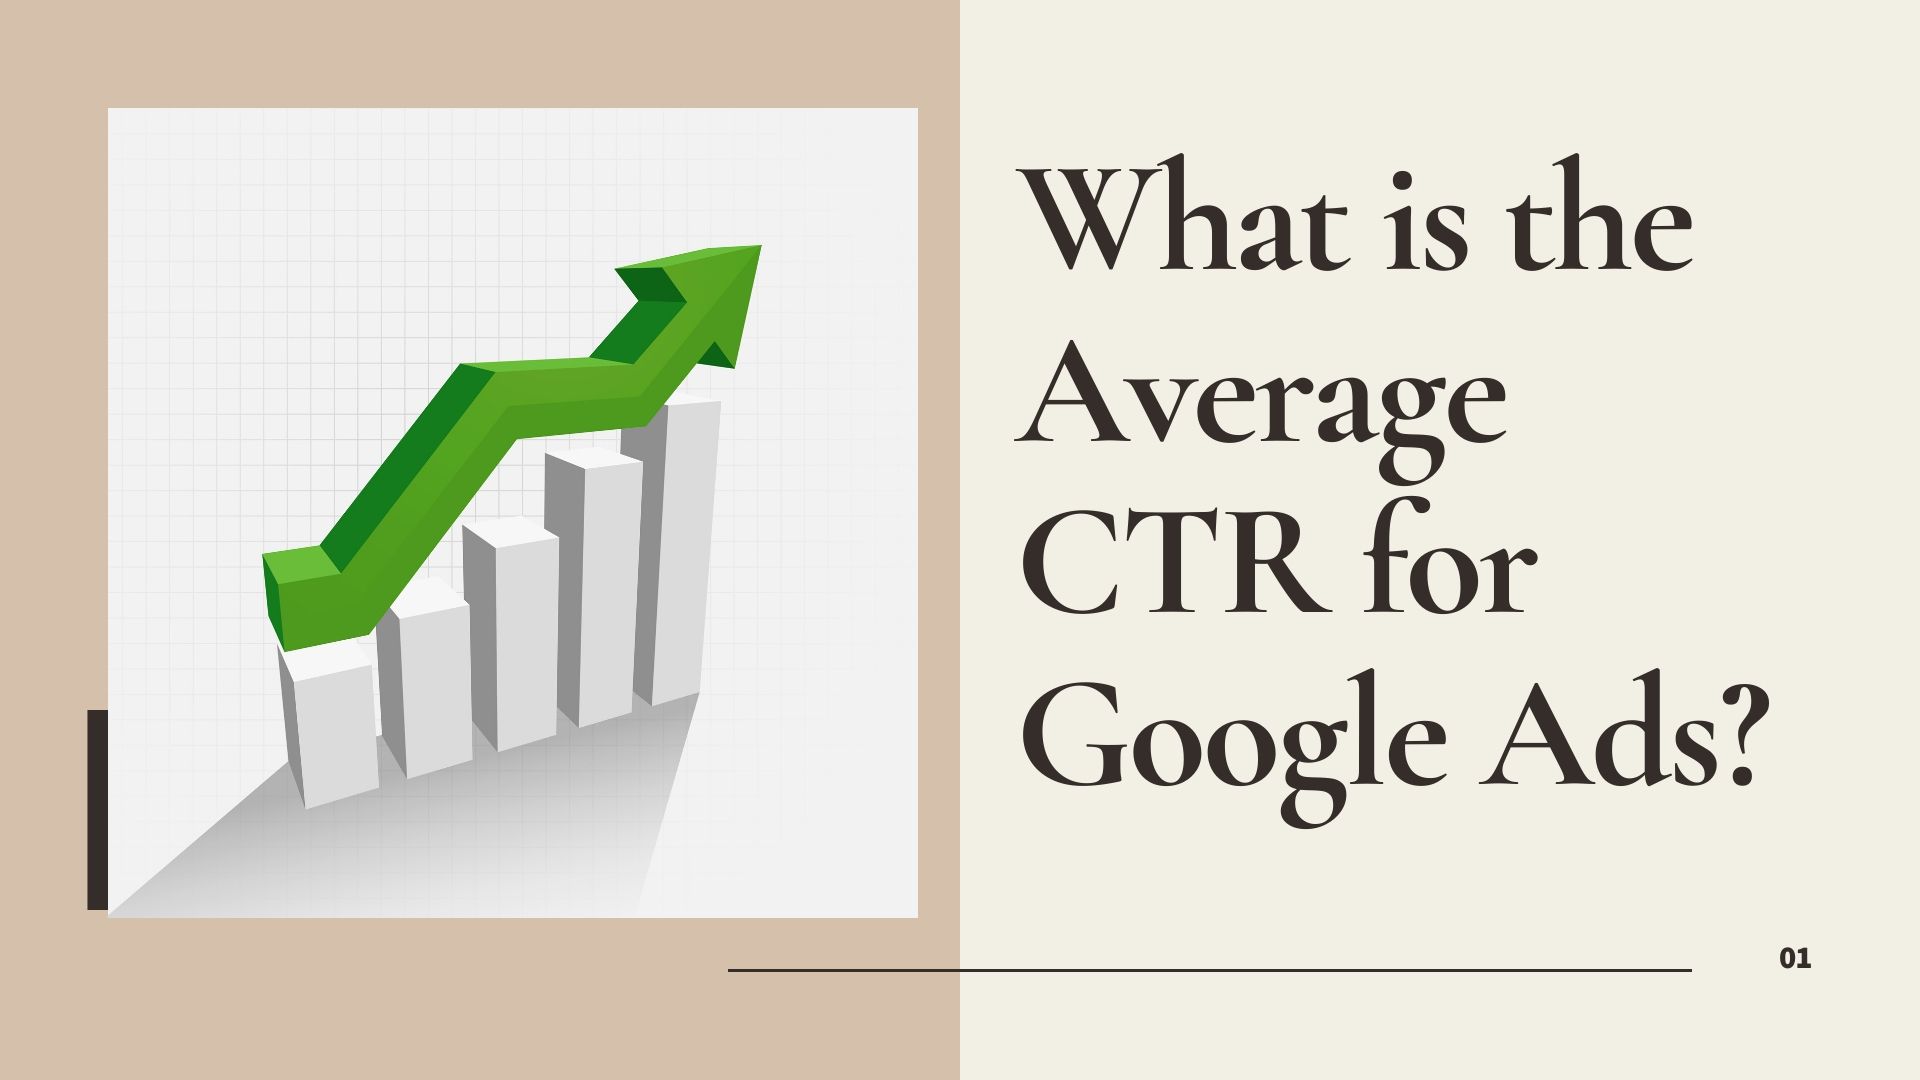 What is the Average CTR for Google Ads?